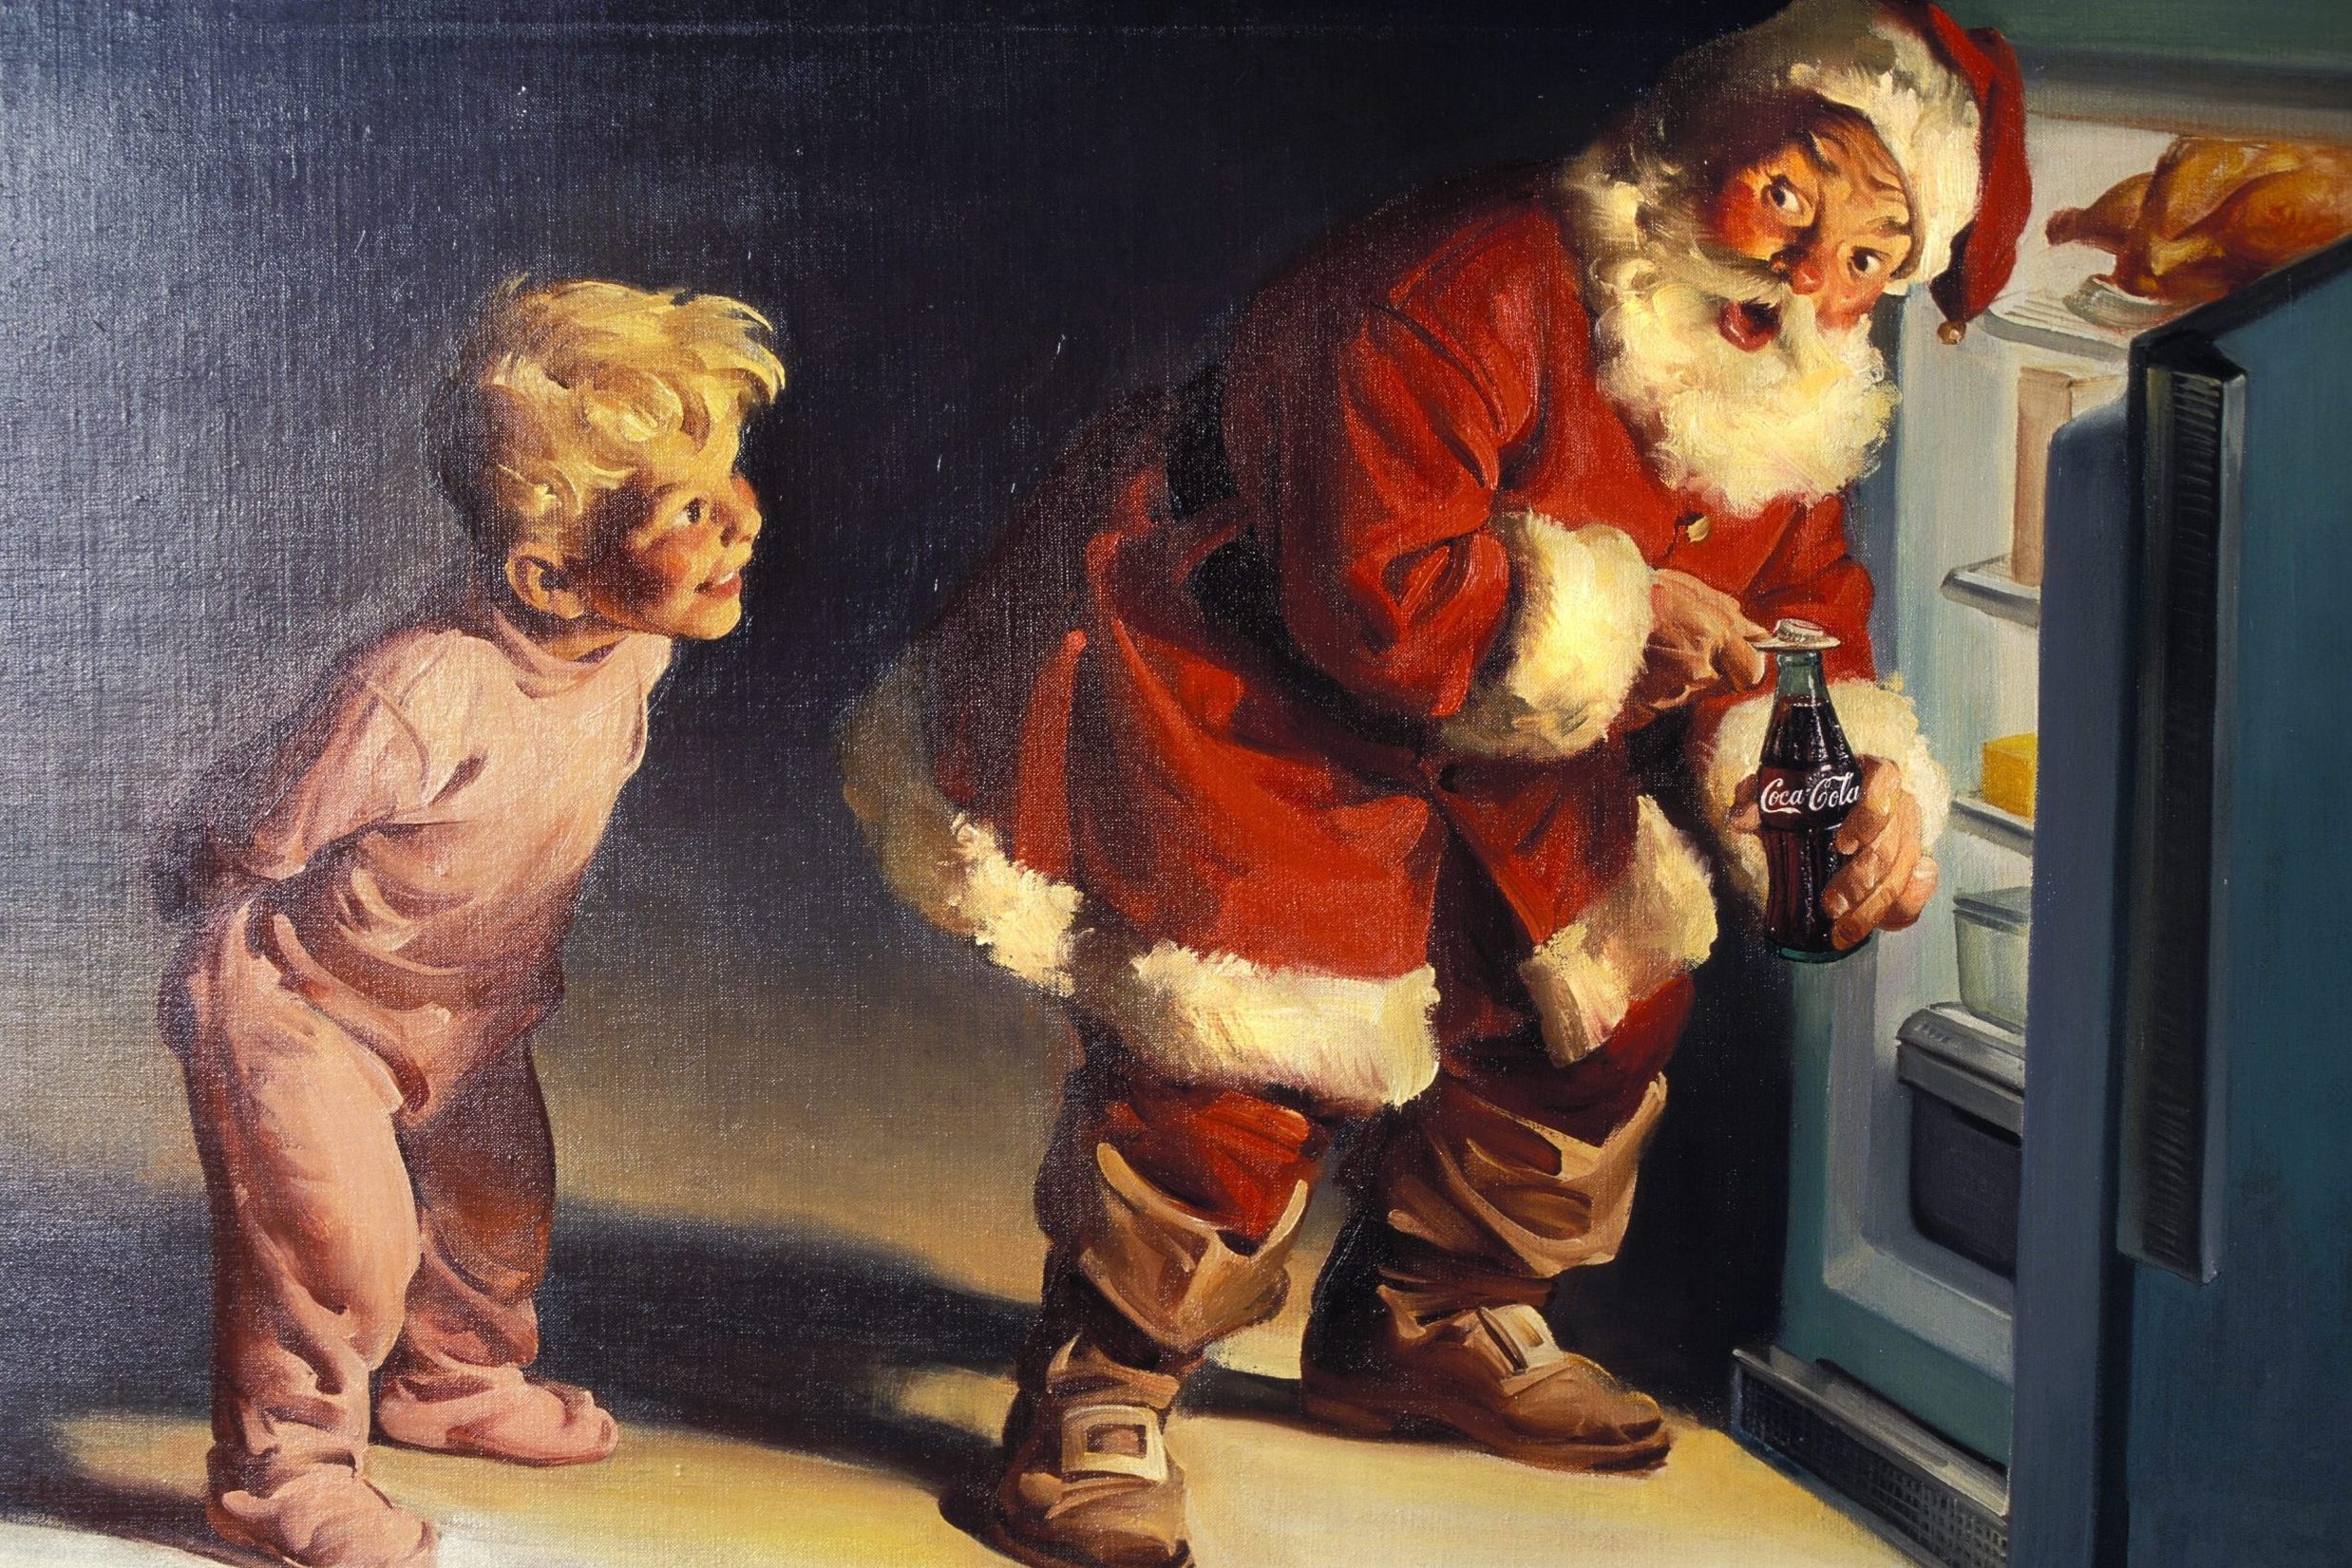 <p>The 20th century solidified the American Santa so much that asking "Is Santa real?" is now a rite of passage for American children. Some of the most famous images of the modern Santa came with the Coca-Cola advertisements drawn by artist Haddon Sundblom, starting in 1931. "They were everywhere," Thompson says. "Those were beautiful pictures. I remember actually taking a little kitchen knife and pulling out one of those pictures, and I hung it up as a <a href="https://www.rd.com/list/cheap-christmas-decorations/" rel="noopener noreferrer">Christmas decoration</a> in my bedroom."</p> <p>Another big way to sell Santa? Department store Santas and, later, mall Santas. "That was a sense of taking this idea that up until that point had only been in literature and illustrations, and putting Santa Claus into actual physical space," he says. Thus began the <a href="https://www.rd.com/list/warm-fuzzy-holiday-traditions/" rel="noopener noreferrer">Christmas tradition</a> of kids sitting on Santa's lap and asking for what they want for Christmas. "That also put Santa Claus in the place he really was the emperor of: the retail establishment."</p> <p>Rudolph, the ninth reindeer, also has his roots in consumer culture, starting off as a promo book for the retailer Montgomery Ward in 1939 before becoming a hit <a href="https://www.rd.com/list/funny-christmas-songs/" rel="noopener noreferrer">Christmas song</a> in 1949 and an animated special in 1964. "The special became a huge hit and continues to be a huge hit," Thompson says. "If you're under 60, you just grew up assuming Rudolph was the front reindeer, and it comes as a great surprise to realize Rudolph was a Montgomery Ward advertising creation."</p> <p>Add in <a href="https://www.rd.com/list/best-christmas-movies/" rel="noopener noreferrer">Christmas movies</a> like <em>Miracle on 34th Street </em>and a host of new Christmas songs focused on the big guy, and you've turned out a modern holiday figure from a third-century saint. "Santa Claus was retrofitted to St. Nicholas from the start," he says.</p>